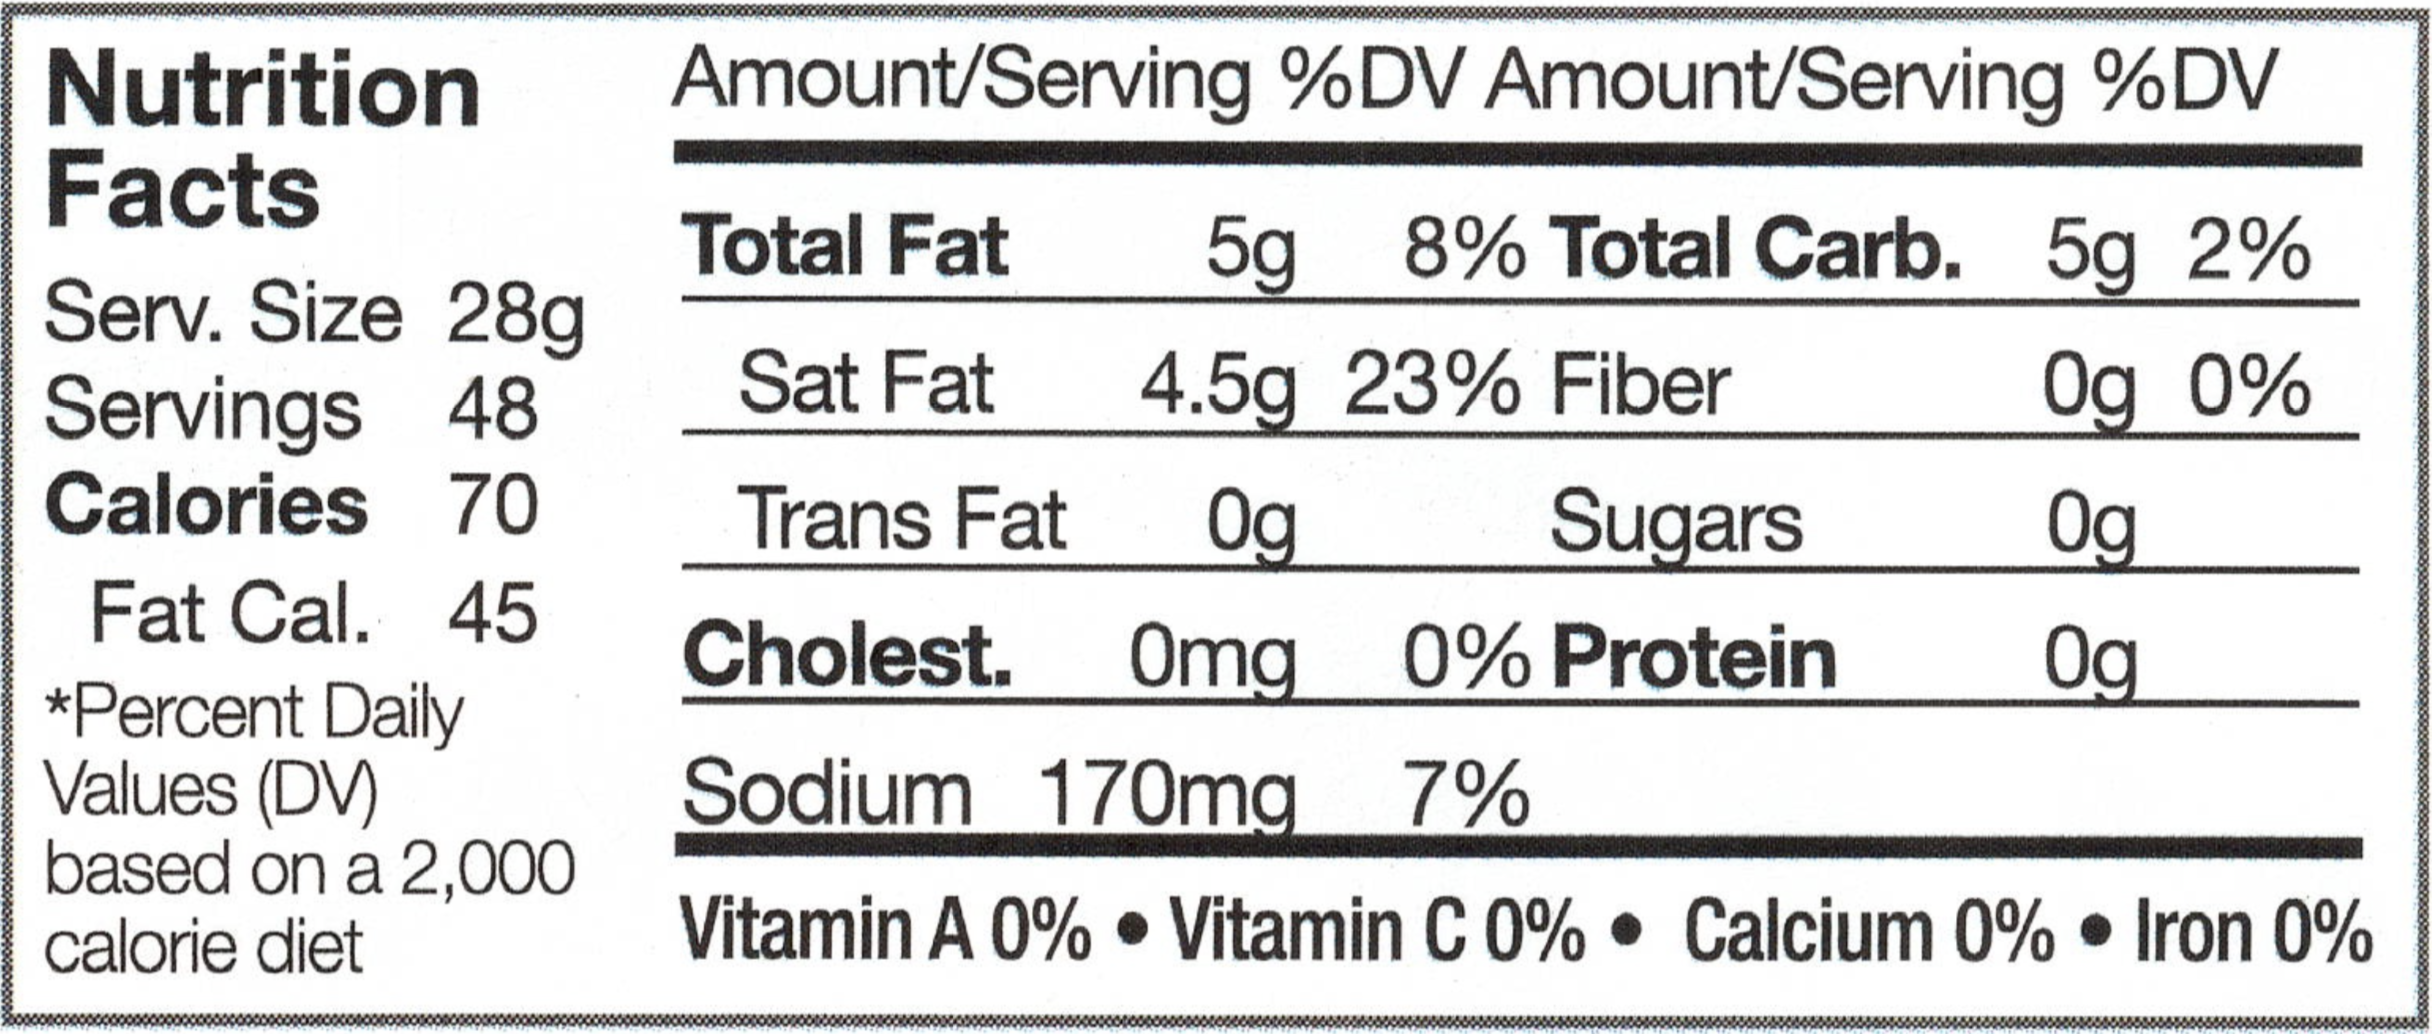 Serving Size: 28g, Servings: 48, Calories: 70, Fat Calories: 45, *Percent Daily Value (DV) based on a 2,000 calorie diet, Anmount/Serving, % DV, Total Fat: 5g, 8%, Saturated Fat: 4.5g, 23%, Trans Fat: 0g, Cholesterol: 0mg 0%, Sodium: 170mg, 7%, Total Carbohydrates: 5g, 2%, Fiber: 0g, 0%, Sugars: 0g, Protein, 0g, Vitamin A: 0%, Vitamin C: 0%, Calcium: 0%, Iron: 0%